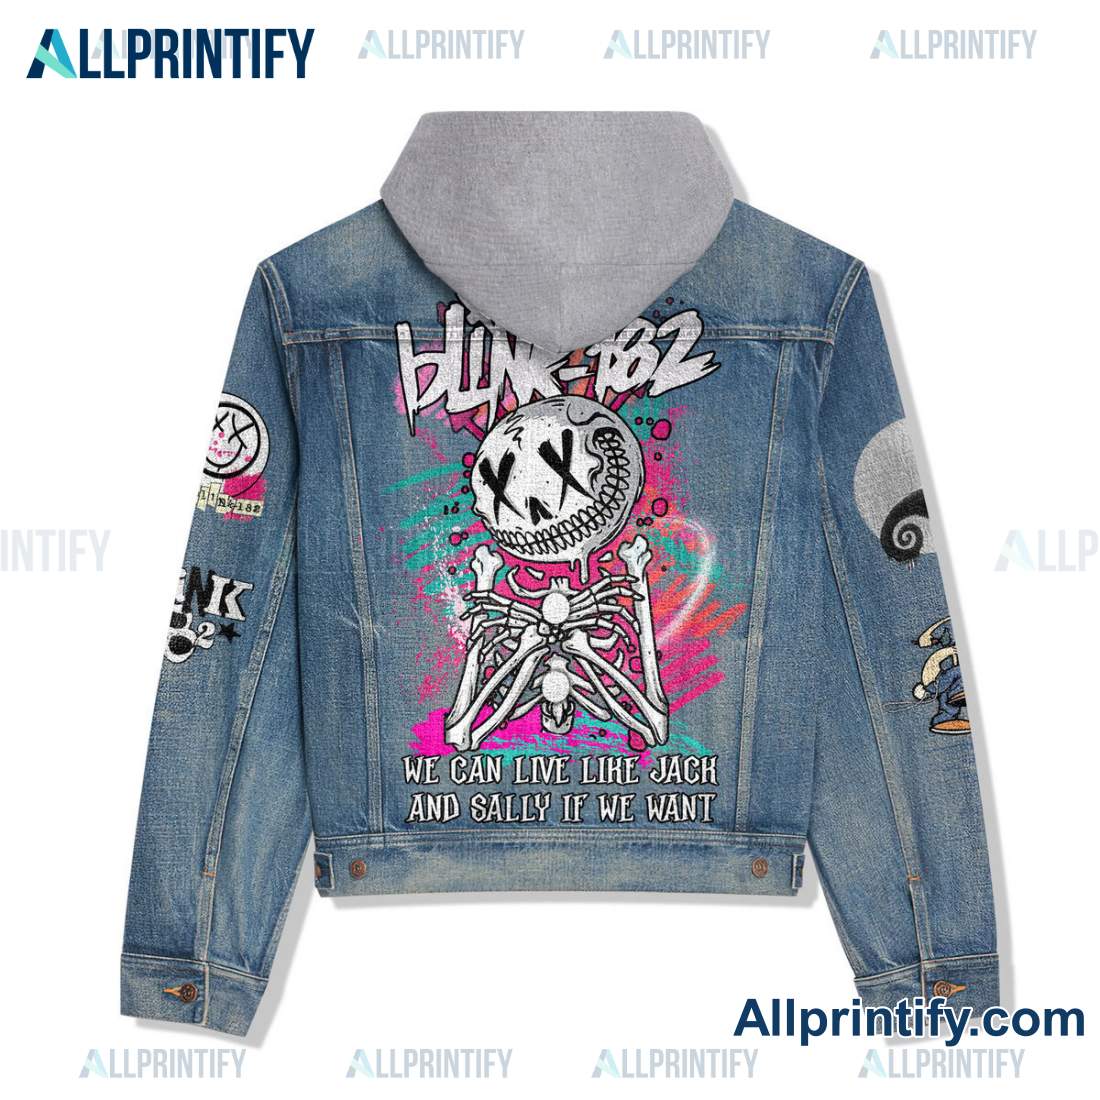 Blink-182 We Can Live Like Jack And Sally If We Want Hooded Denim Jacket b